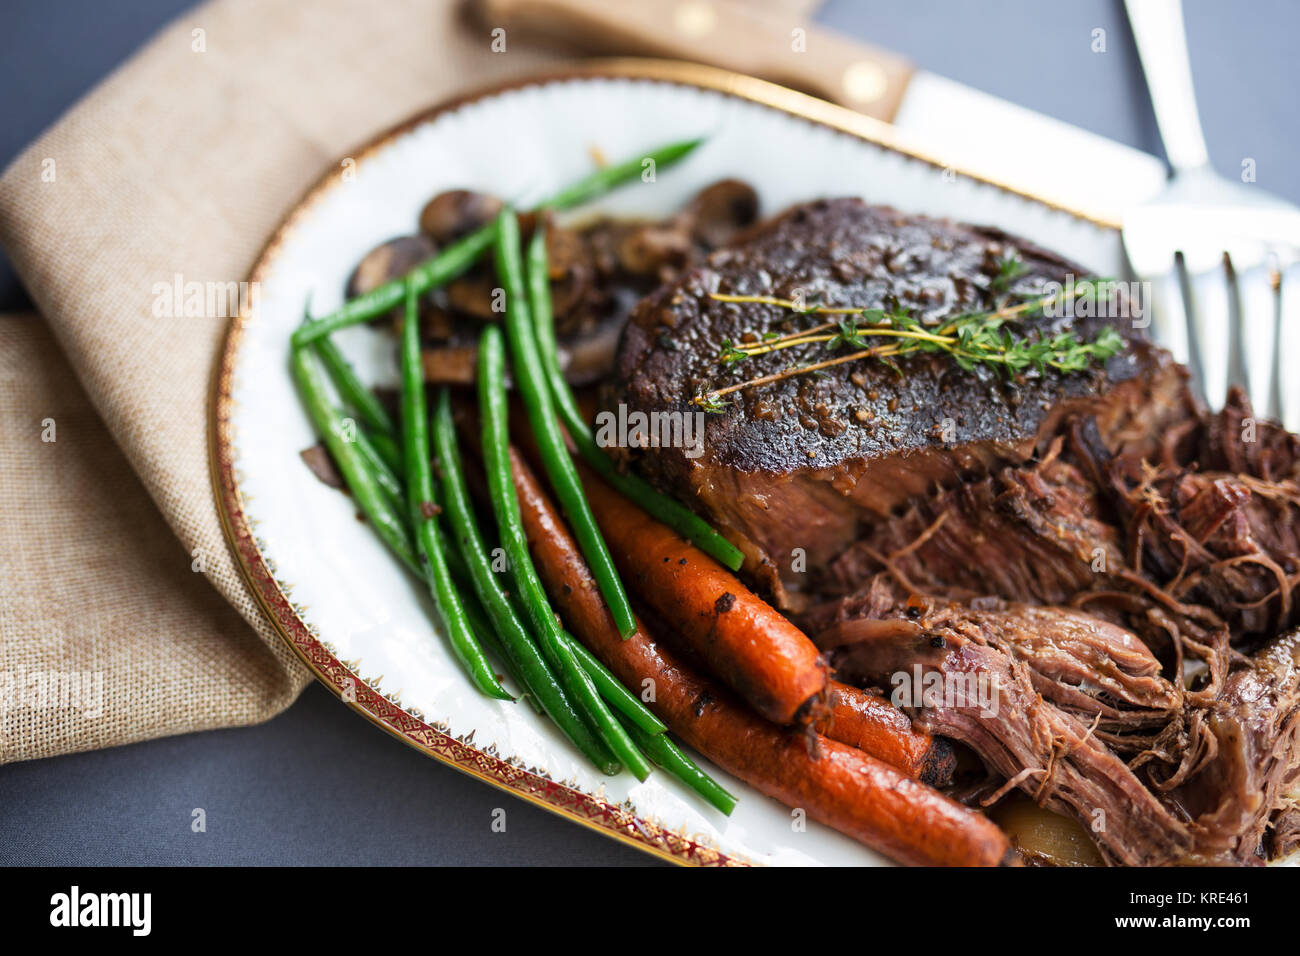 Close up shot of a pot roast with carrots, green beans and mushrooms on a white platter with gold rim. Stock Photo